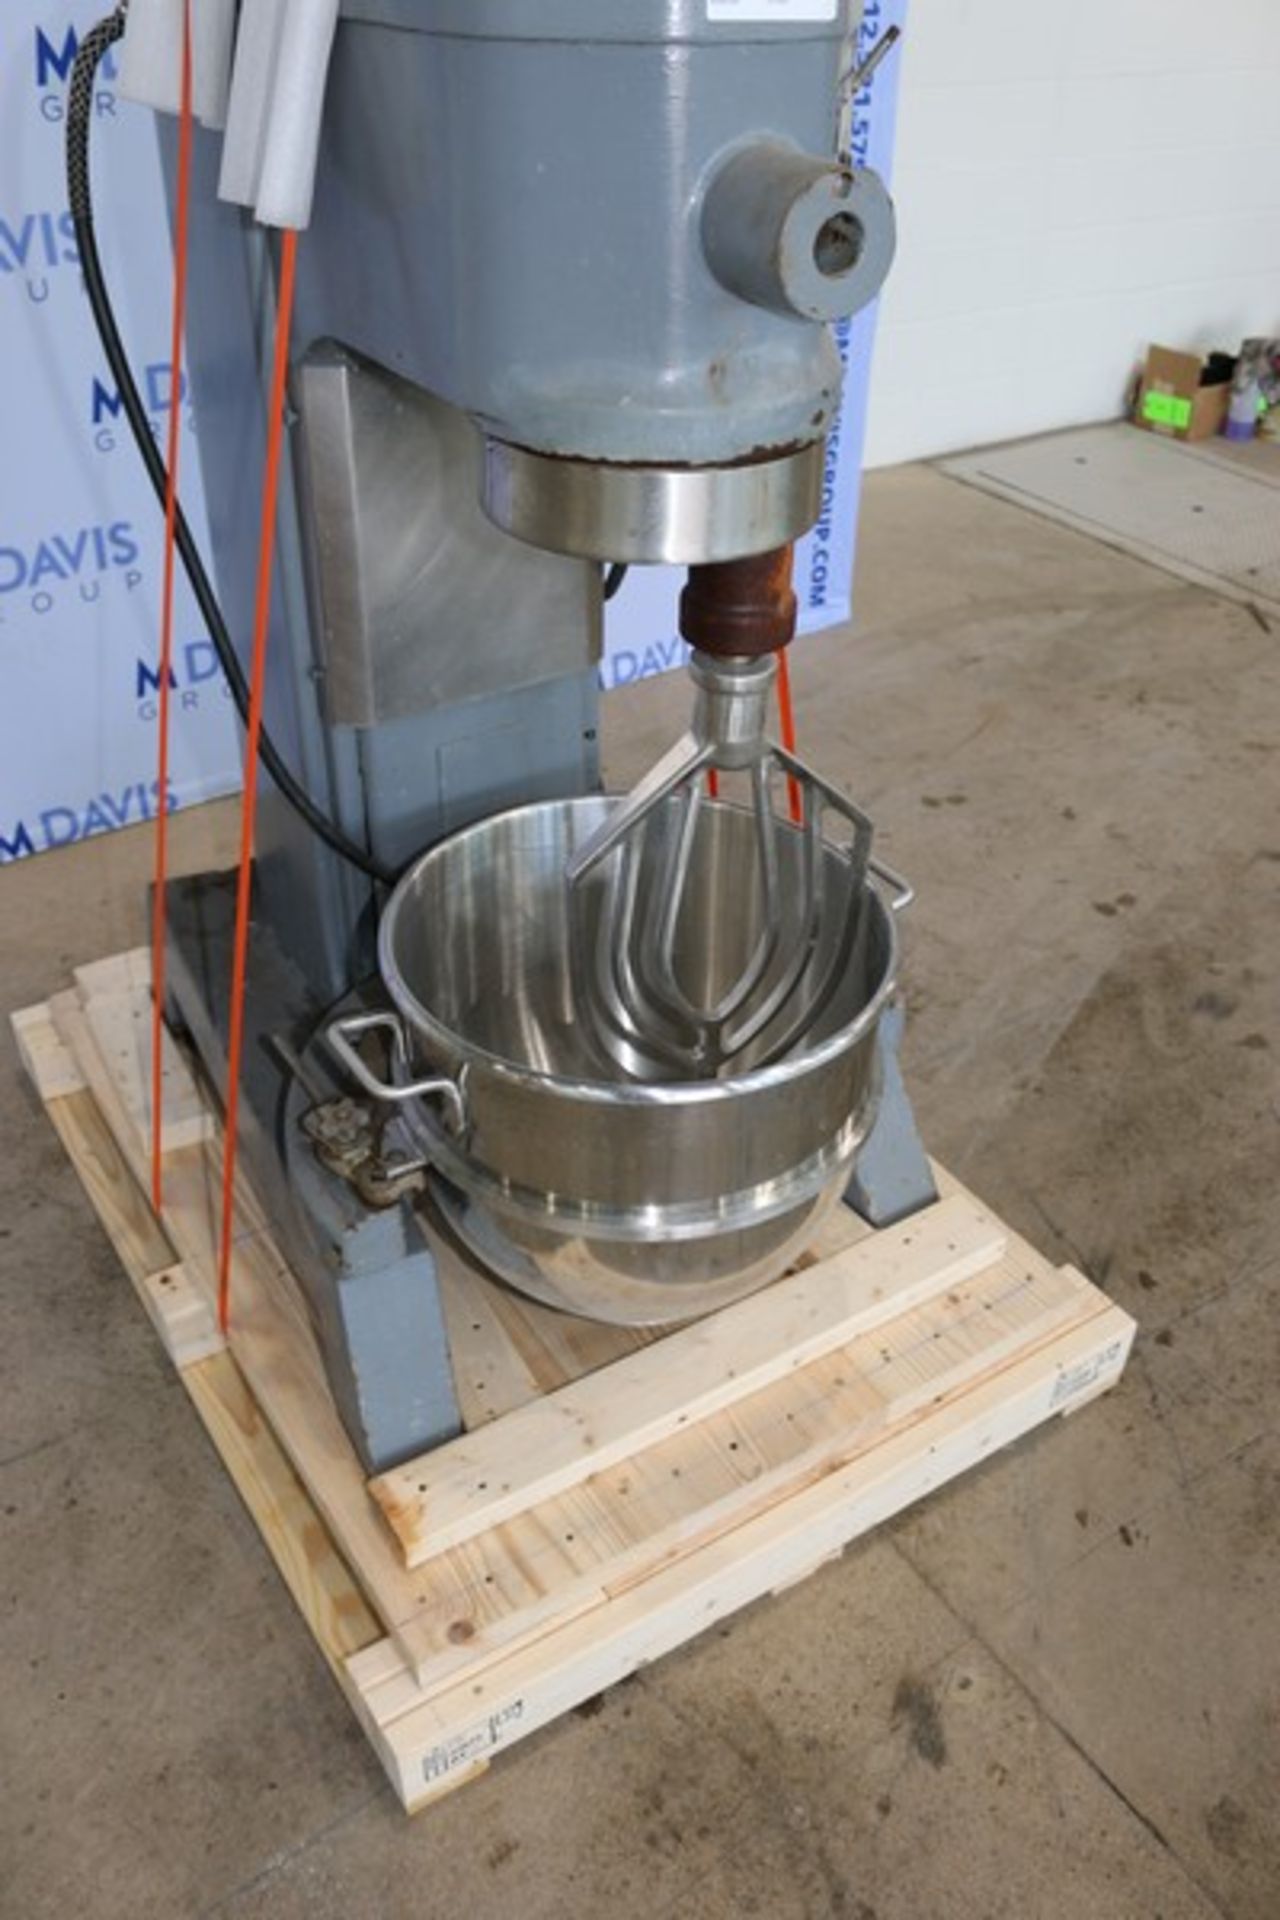 Hobart Mixer,M/N L-800, S/N 11-213-617, 200 Volts, 1725 RPM Motor, with 1-1/2 hp Motor, with S/S - Bild 2 aus 3